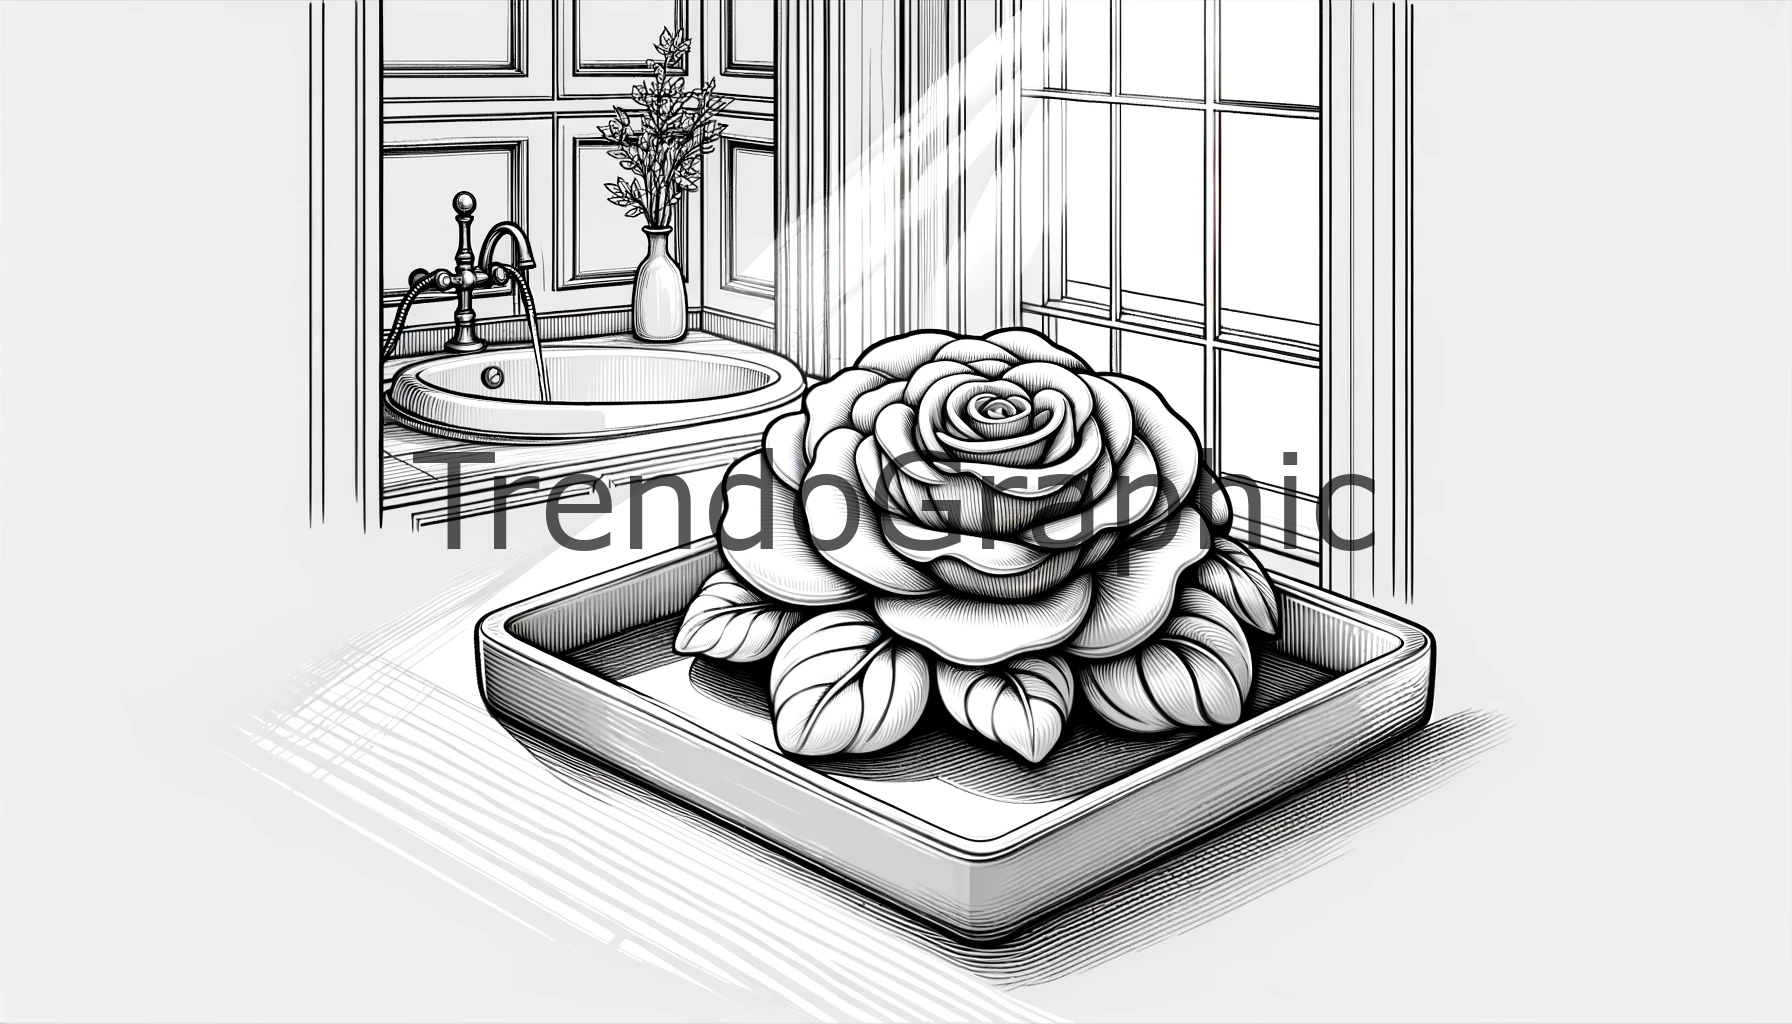 Tranquil Rose-Soap Art in Serene Bathroom Ambiance